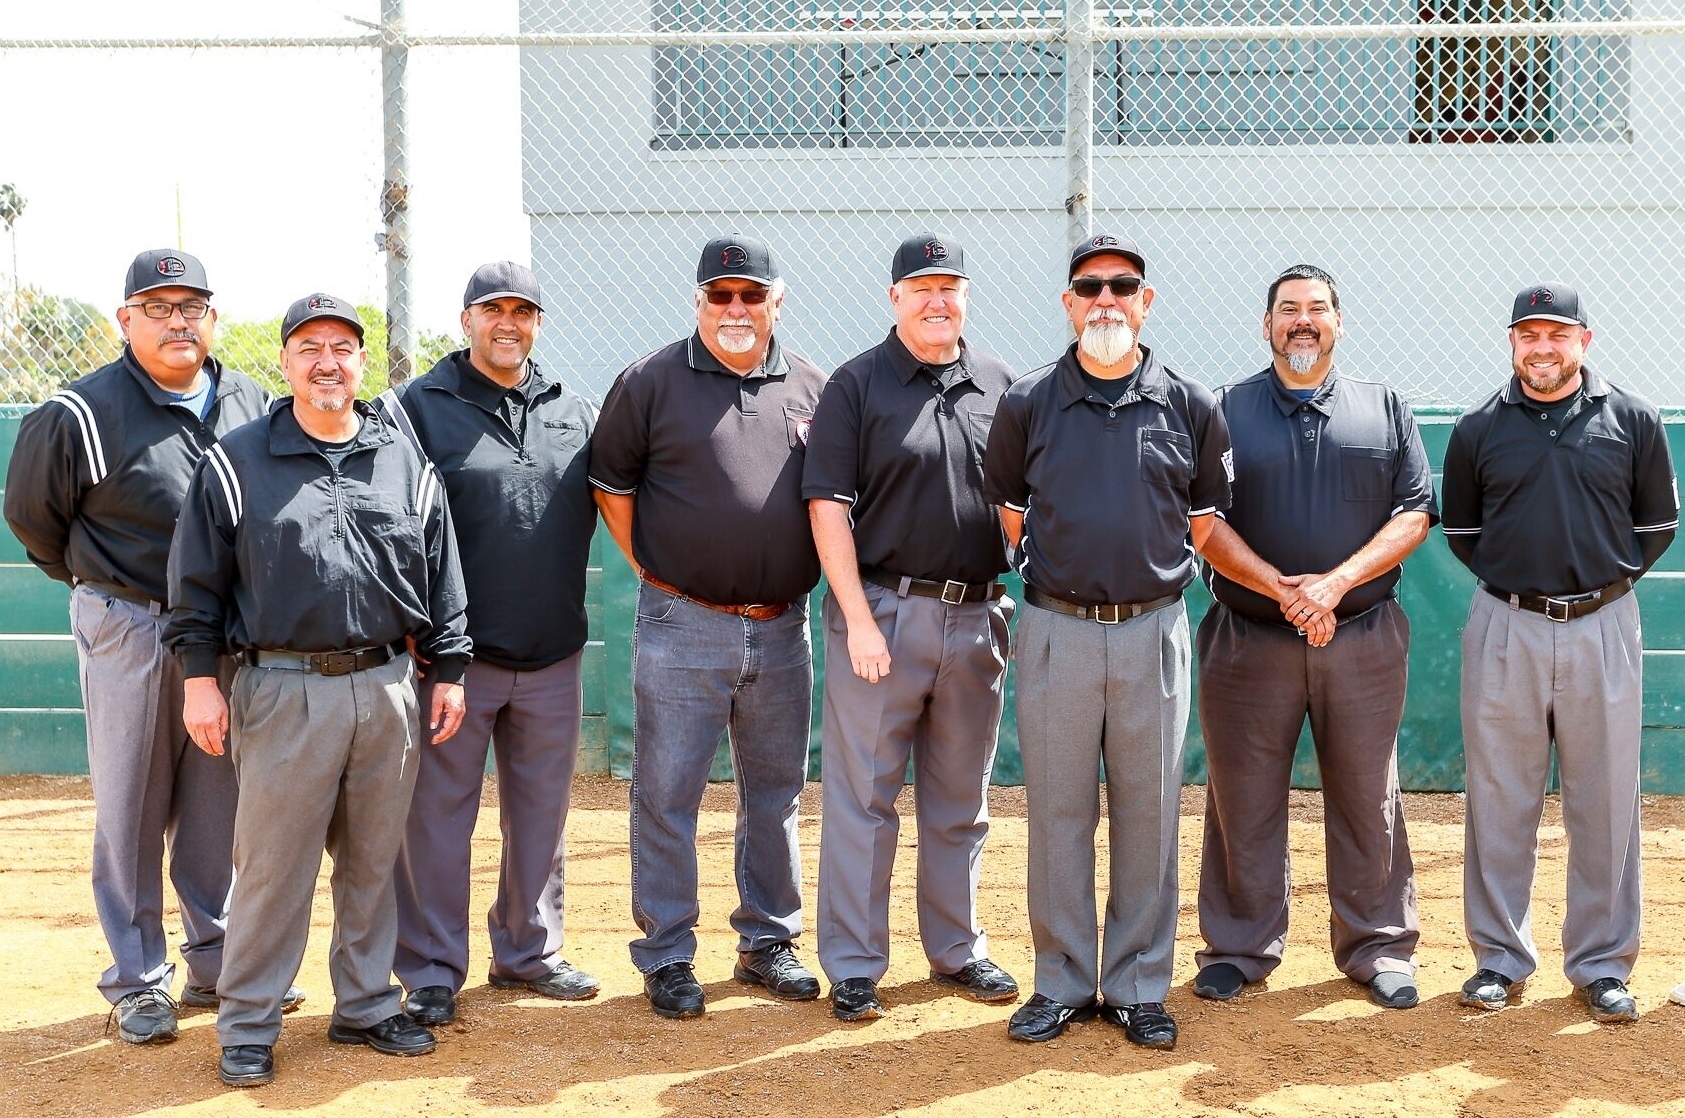 Umpires for Little League District 42 sat down with CaliSports News